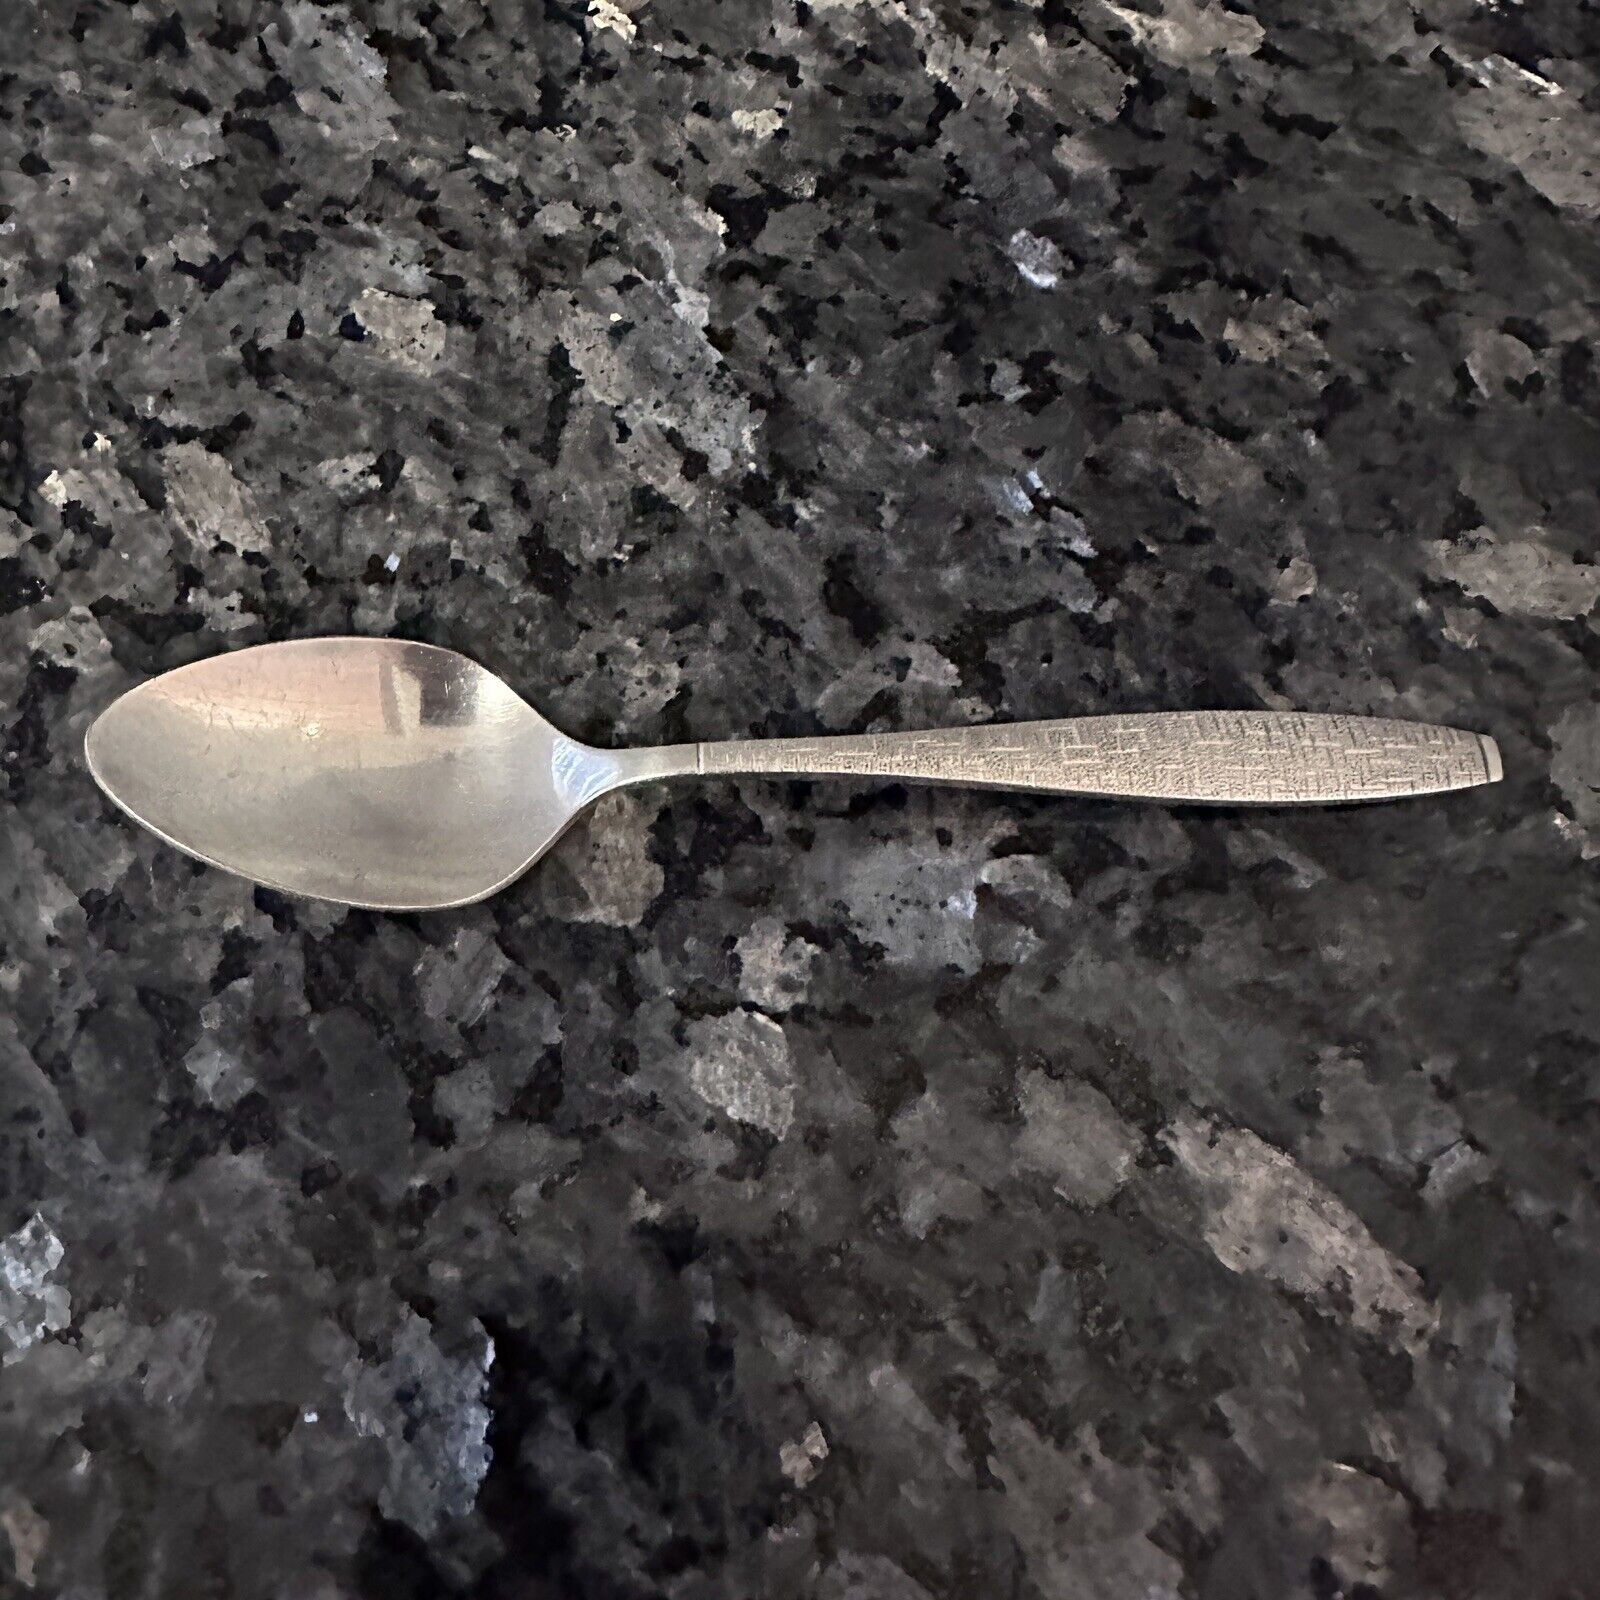 VINTAGE TWA AIRLINES SPOON TRANS WORLD AIRLINES STAINLESS